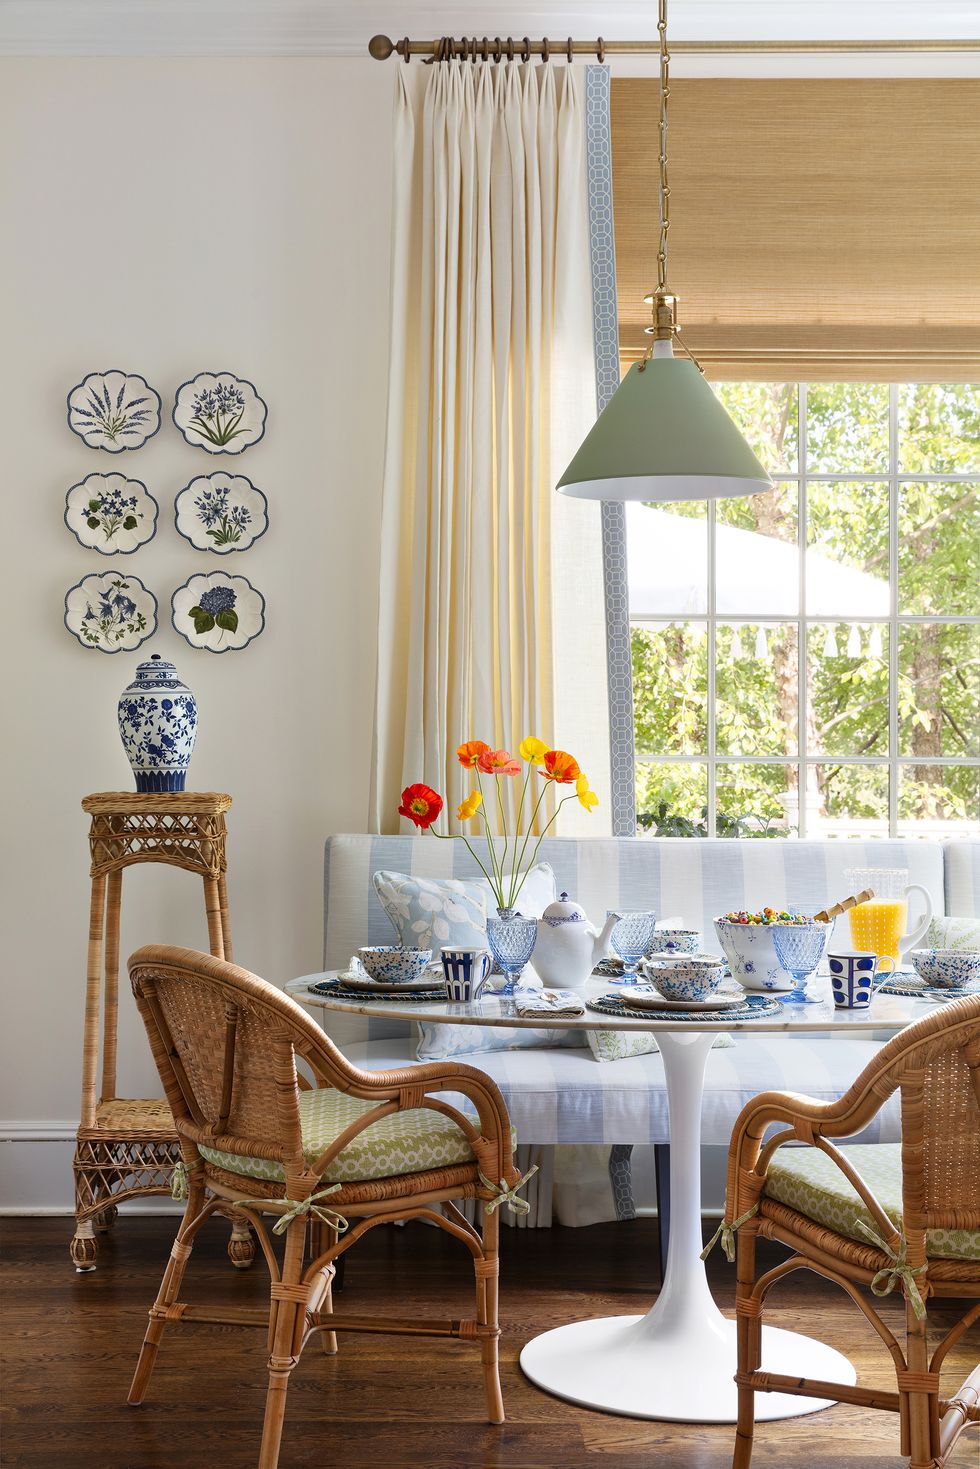 breakfast nook, white and blue striped seat cushions, wicker chairs, cream colored curtains